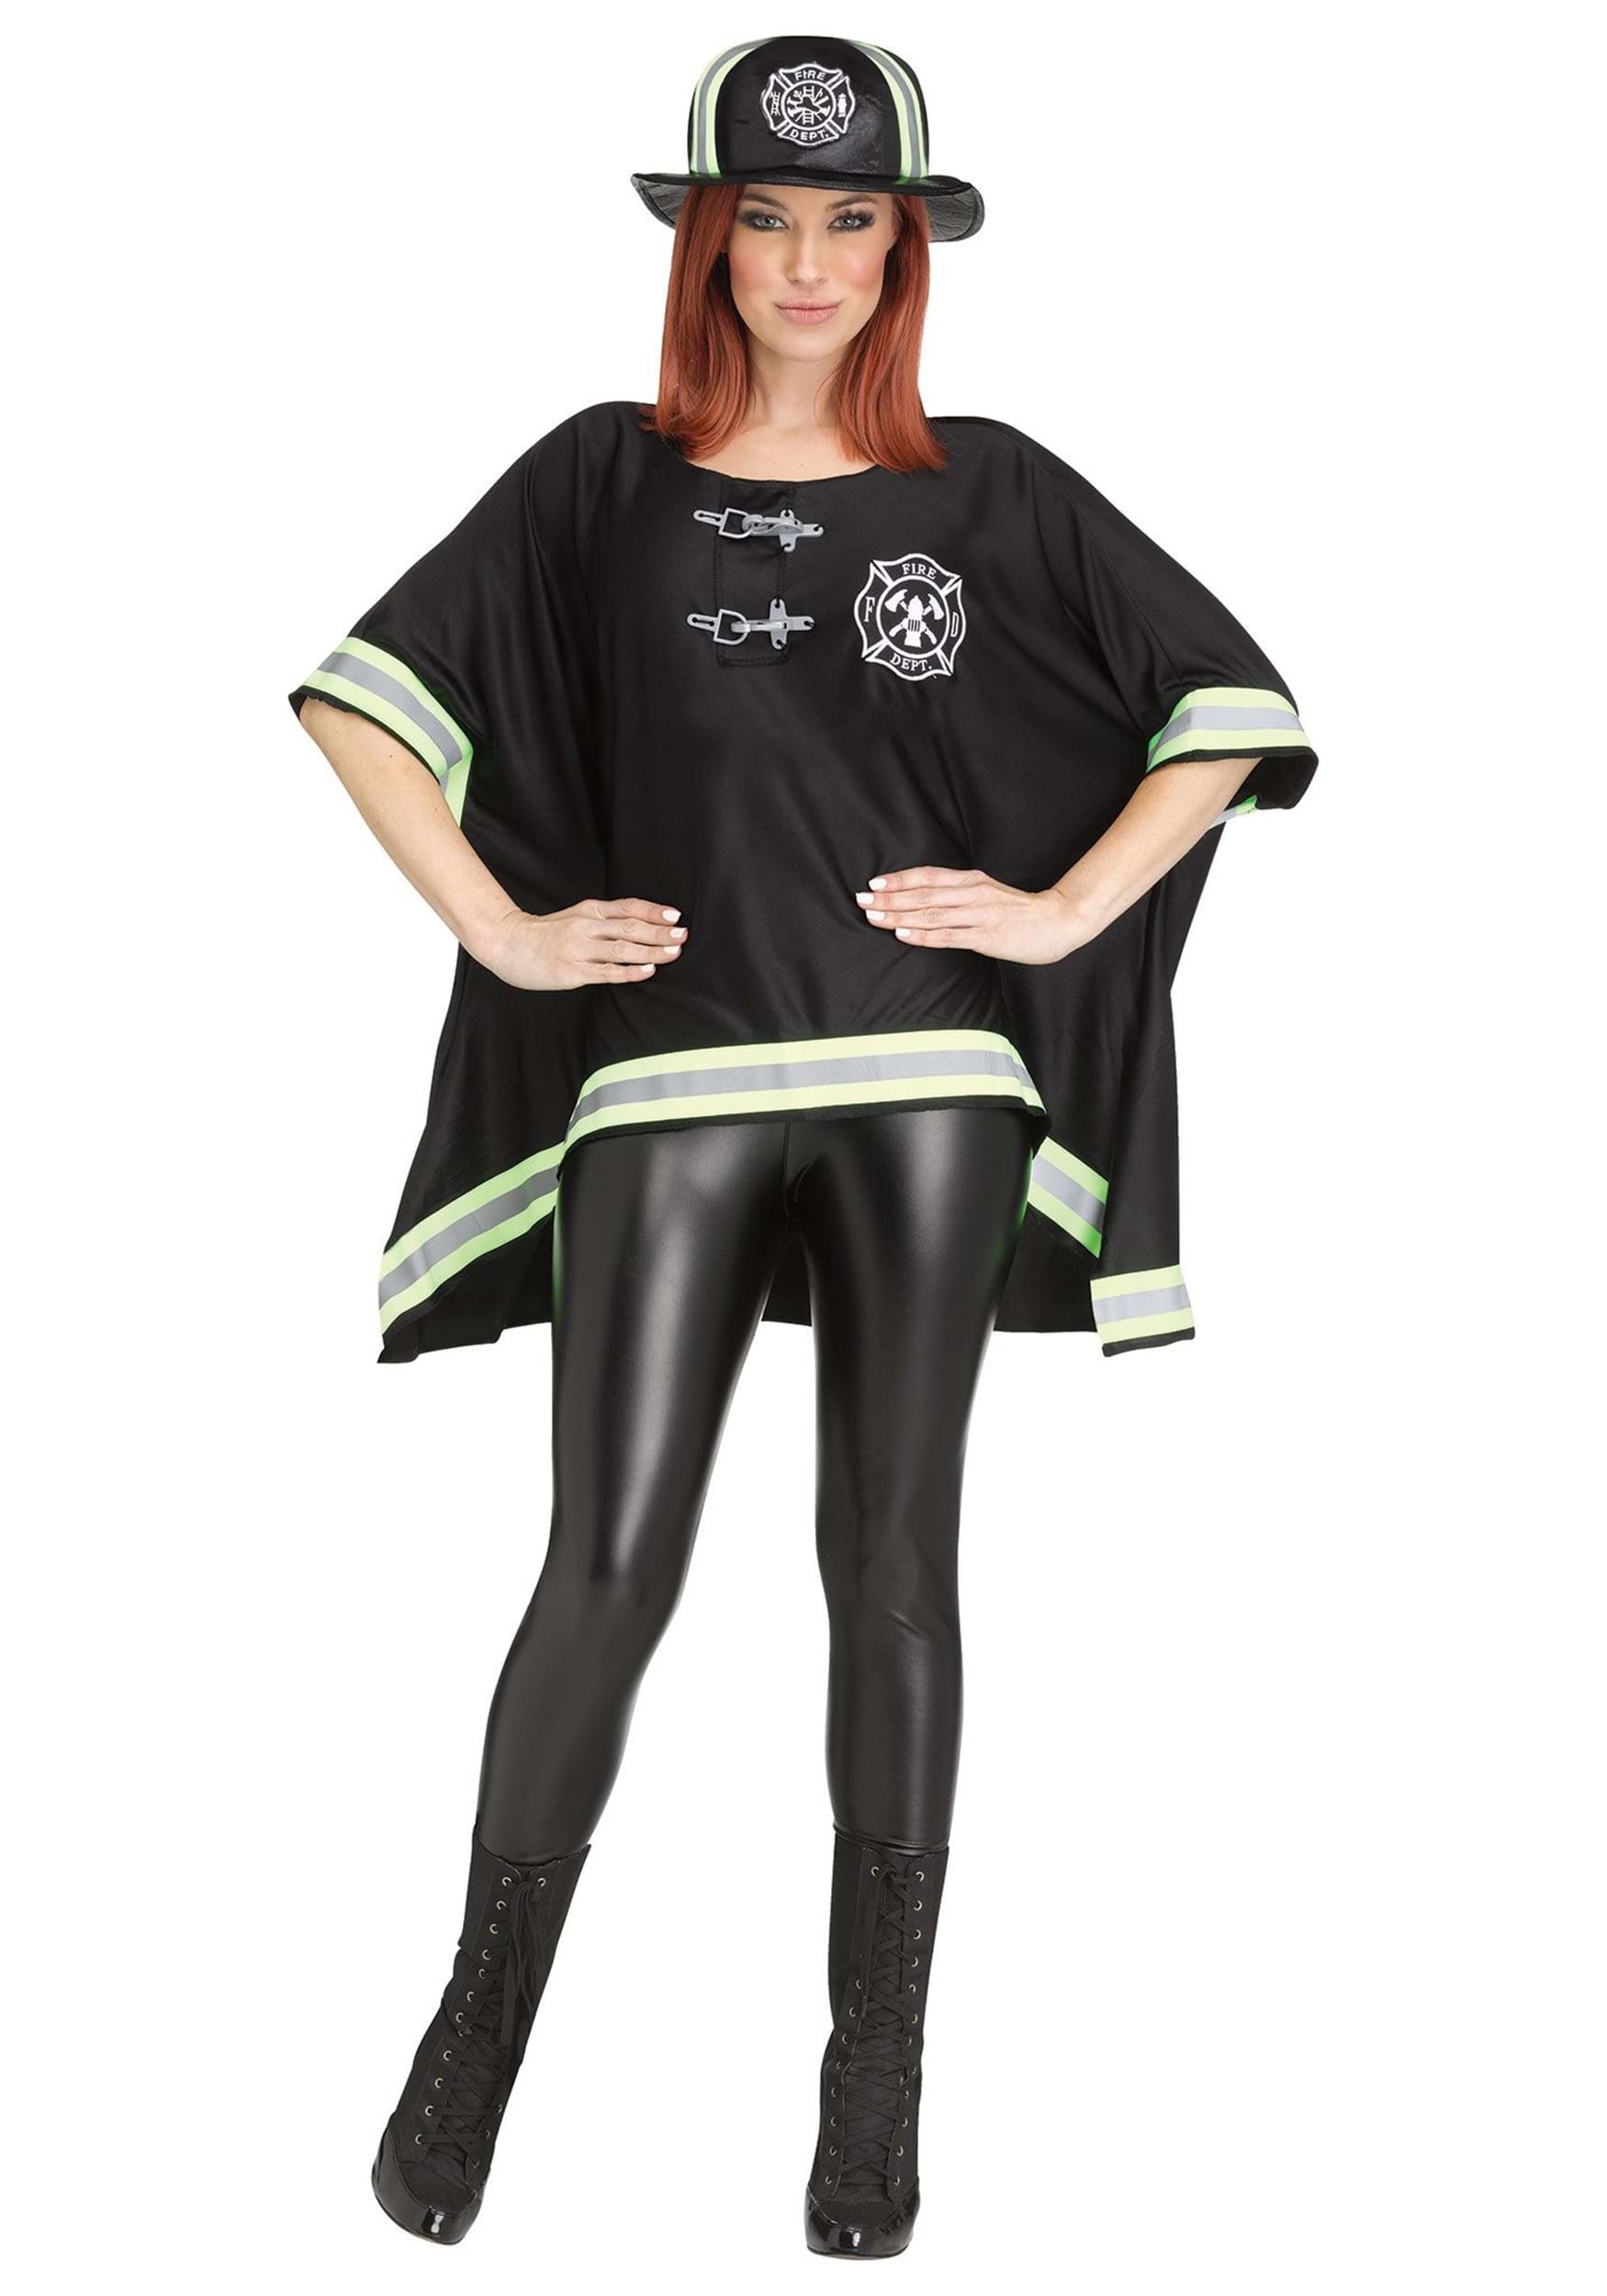 Women’s Firefighter Poncho Costume